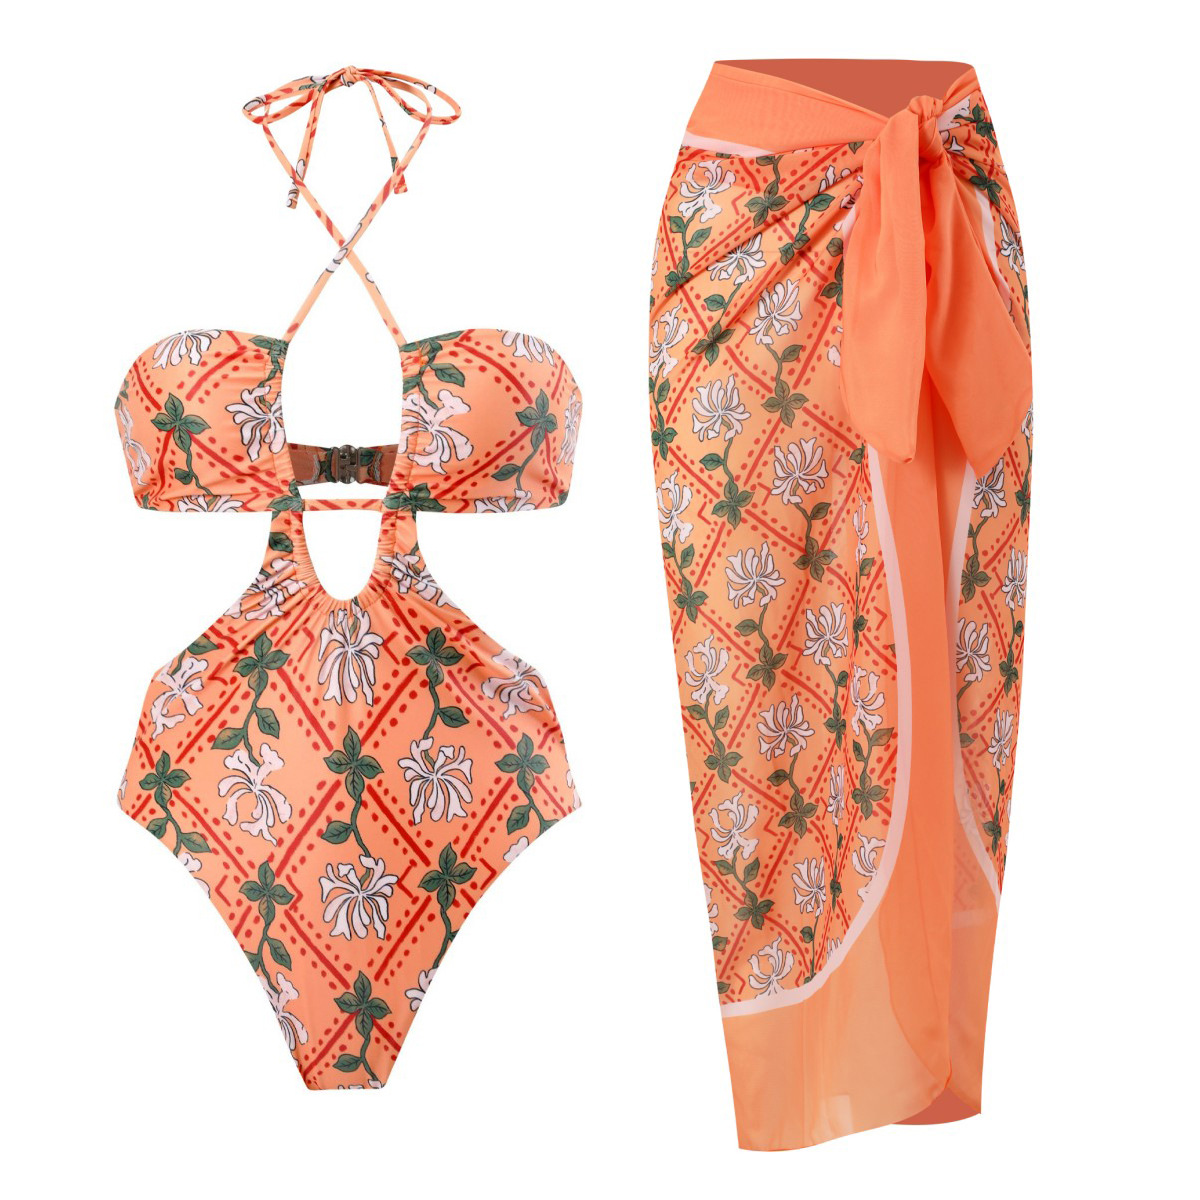 NDL2320--New Printed Swimsuit Pleated Halter One-piece Swimsuit Suit